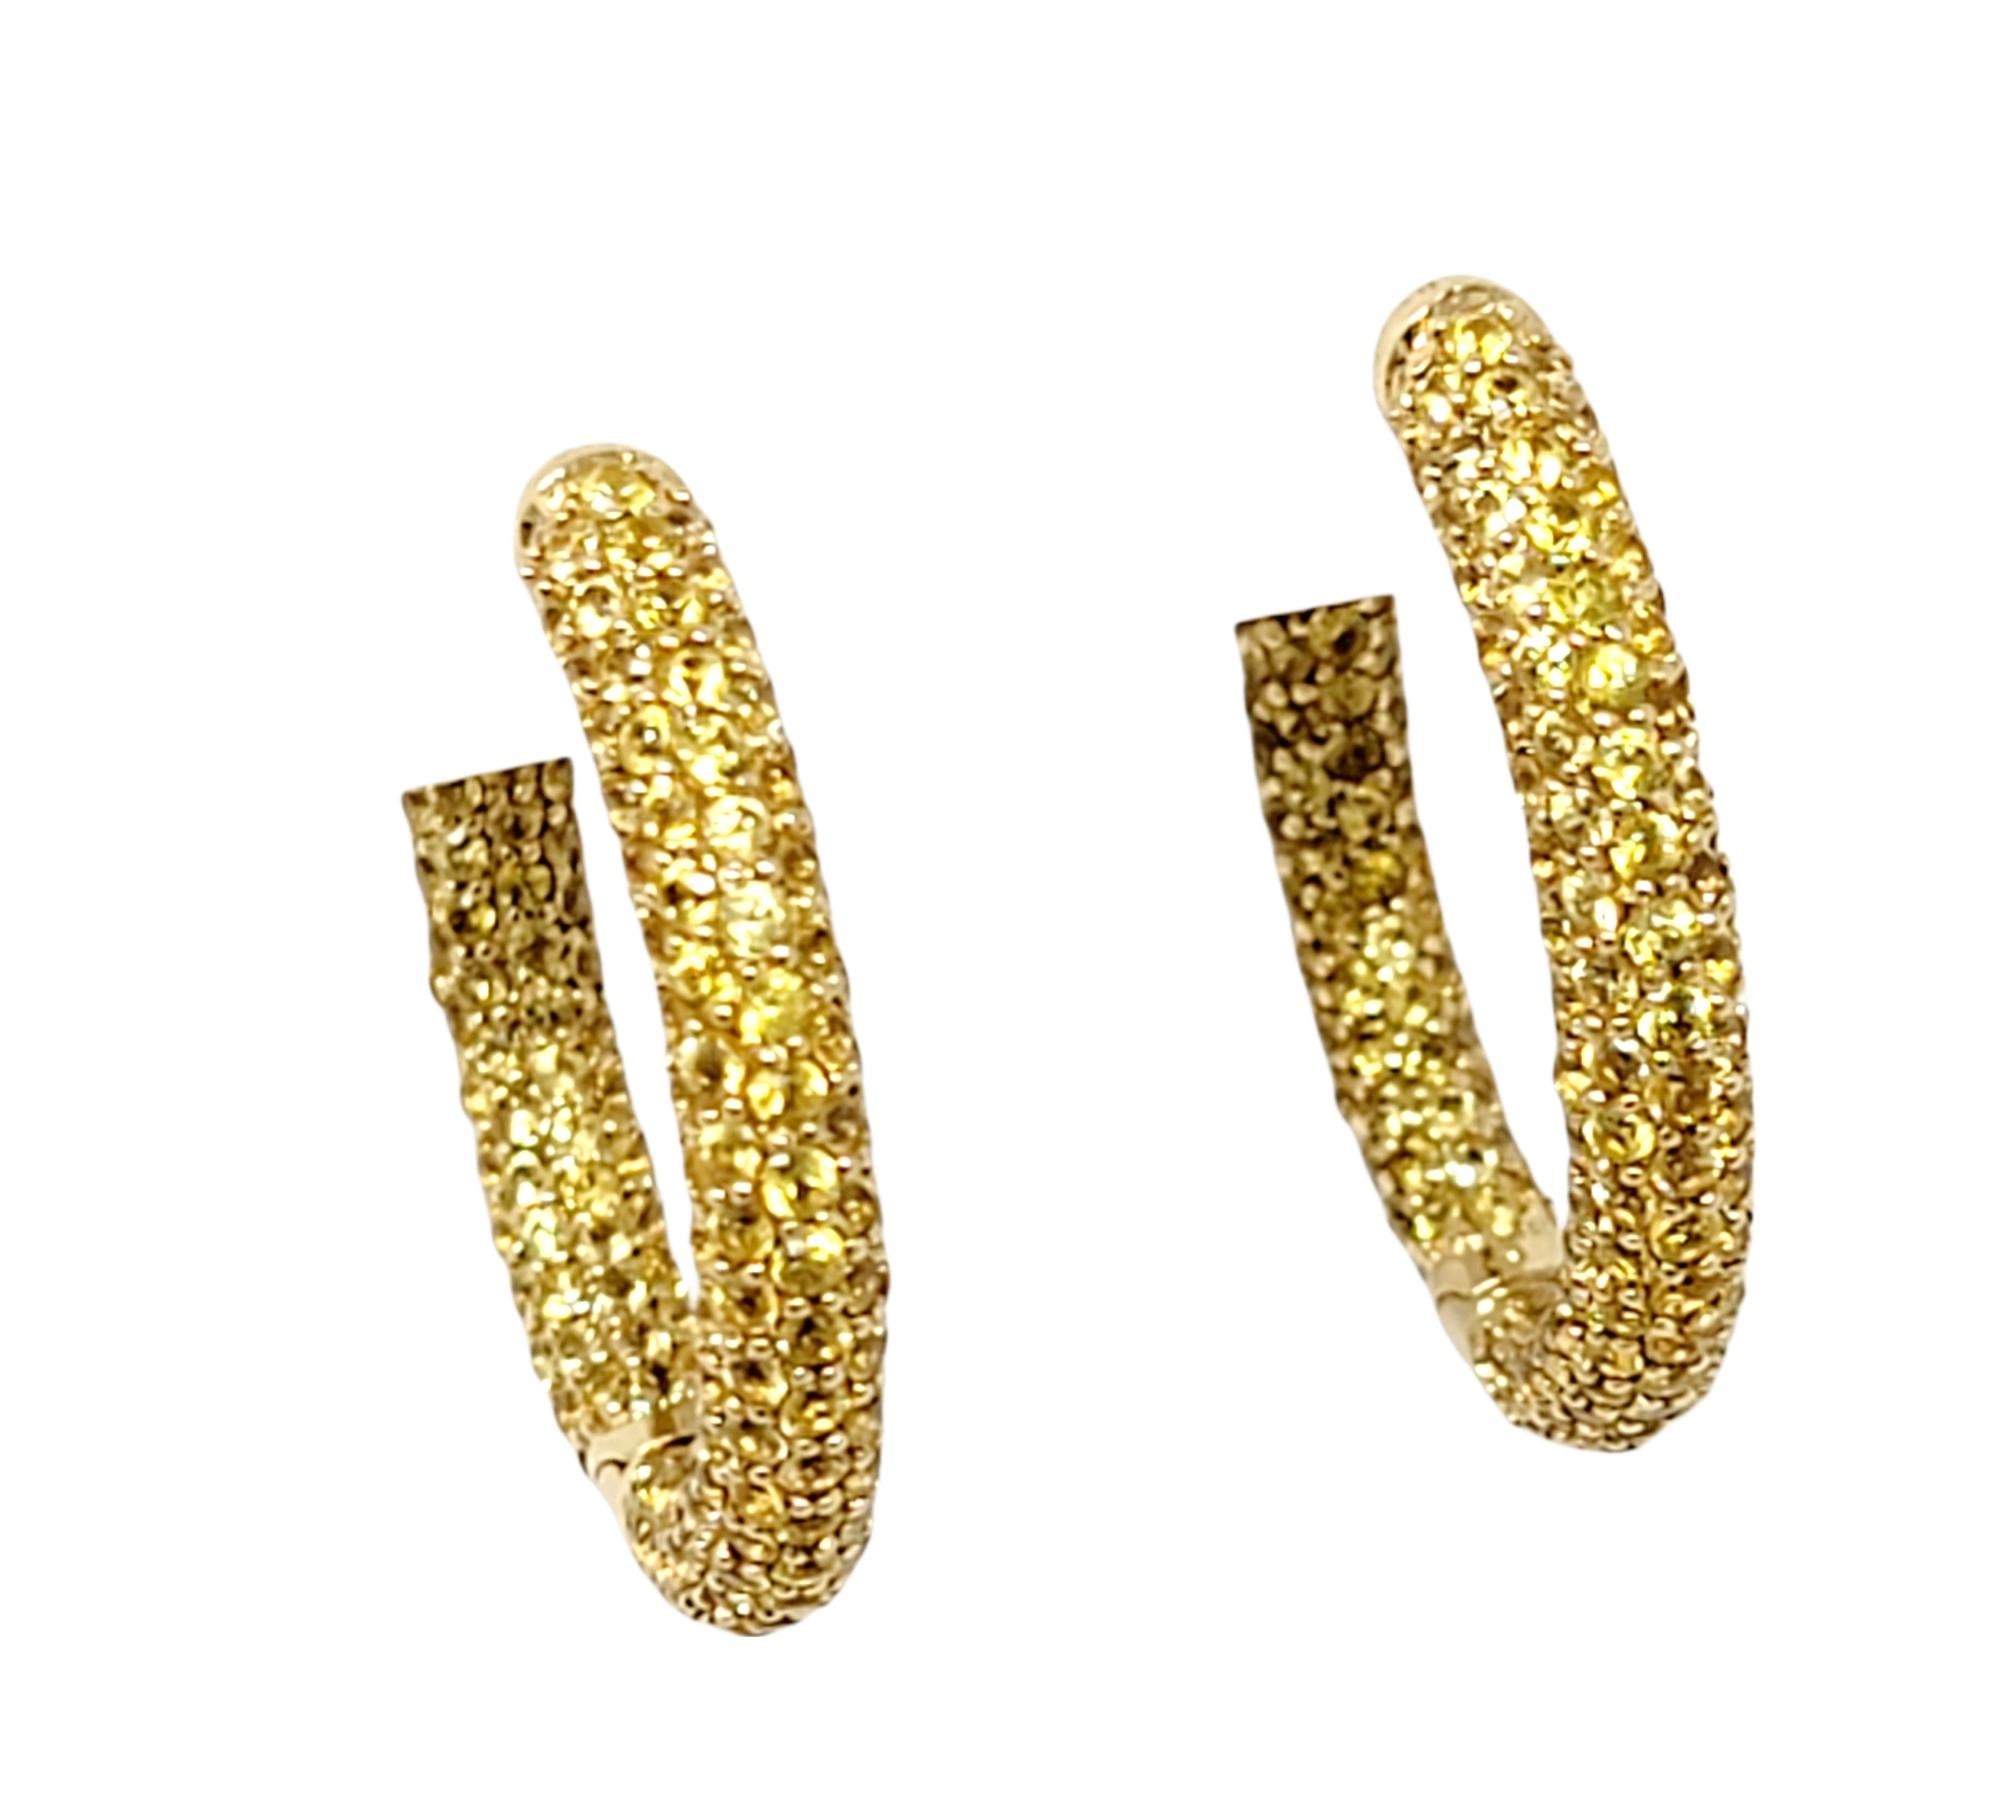 Simply stunning 14 karat yellow gold and yellow sapphire pave hoop earrings. Arranged in a unique inside/outside setting, the stones are positioned to catch the light from different angles, making your lobes absolutely glow. 
These are earrings for